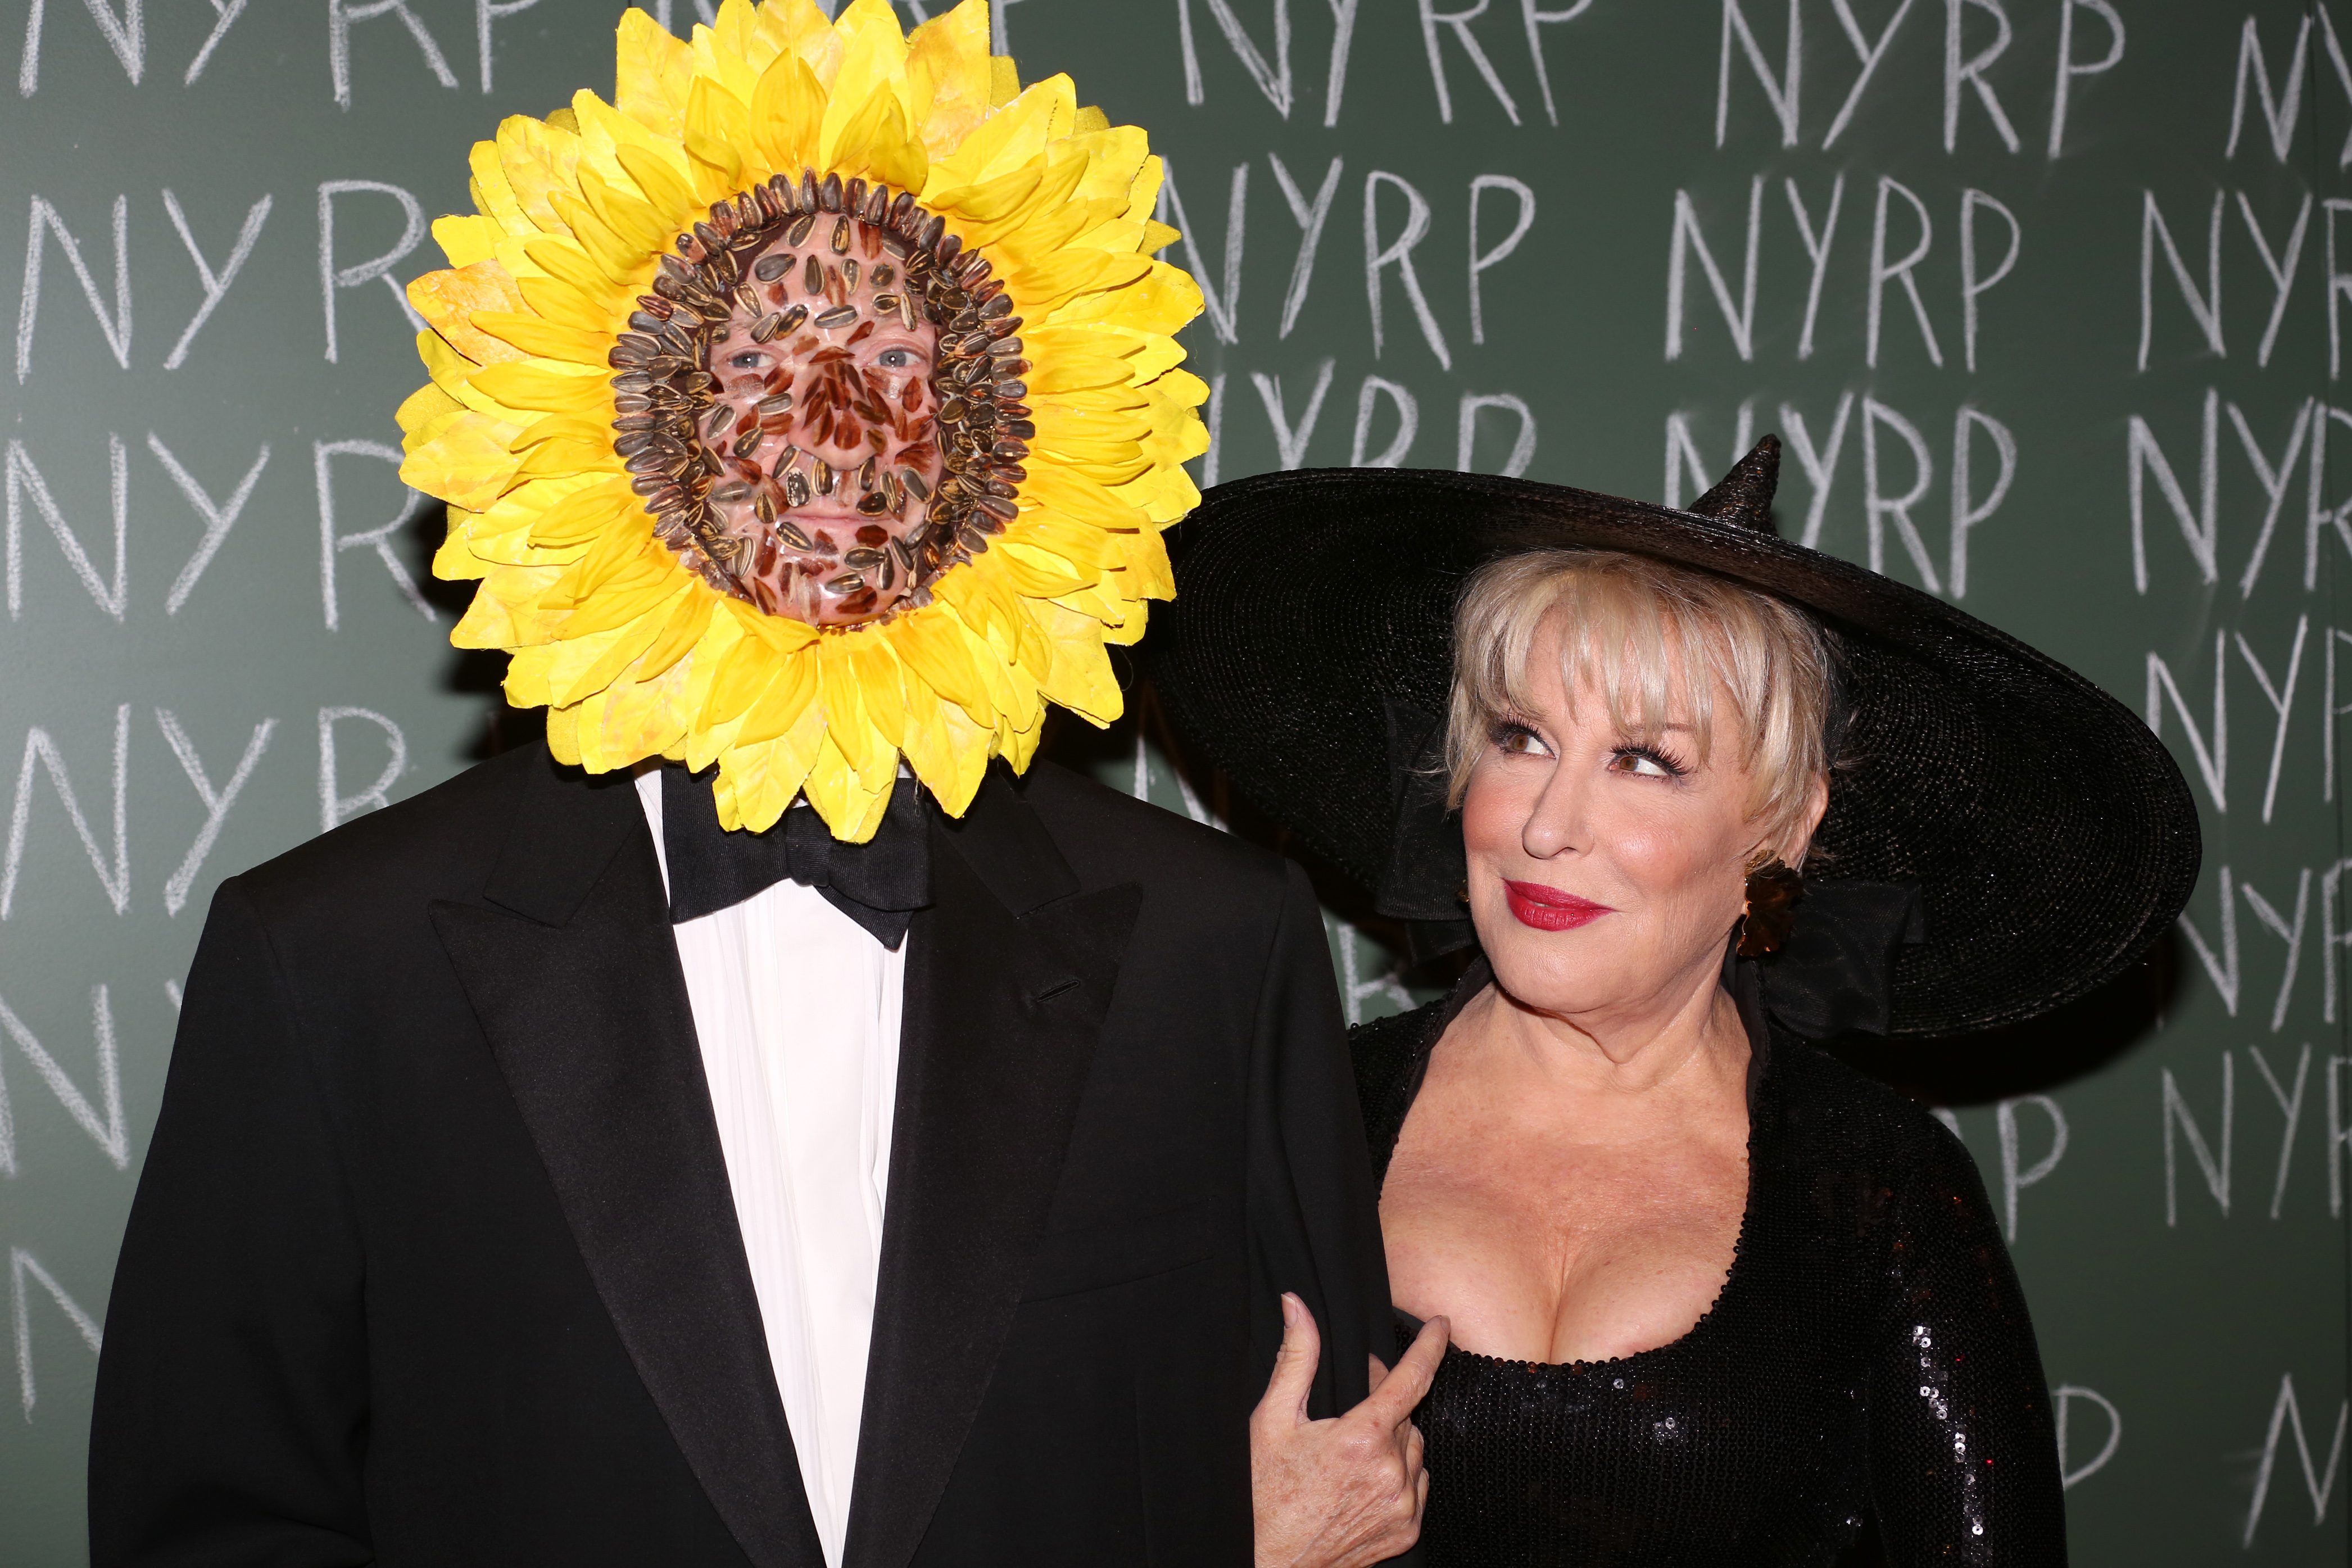 Martin von Haselberg and Bette Midler at the 19th Annual Hulaween Gala: Fellini Hulaweeni, October 31, 2014 in New York City | Source: Getty Images